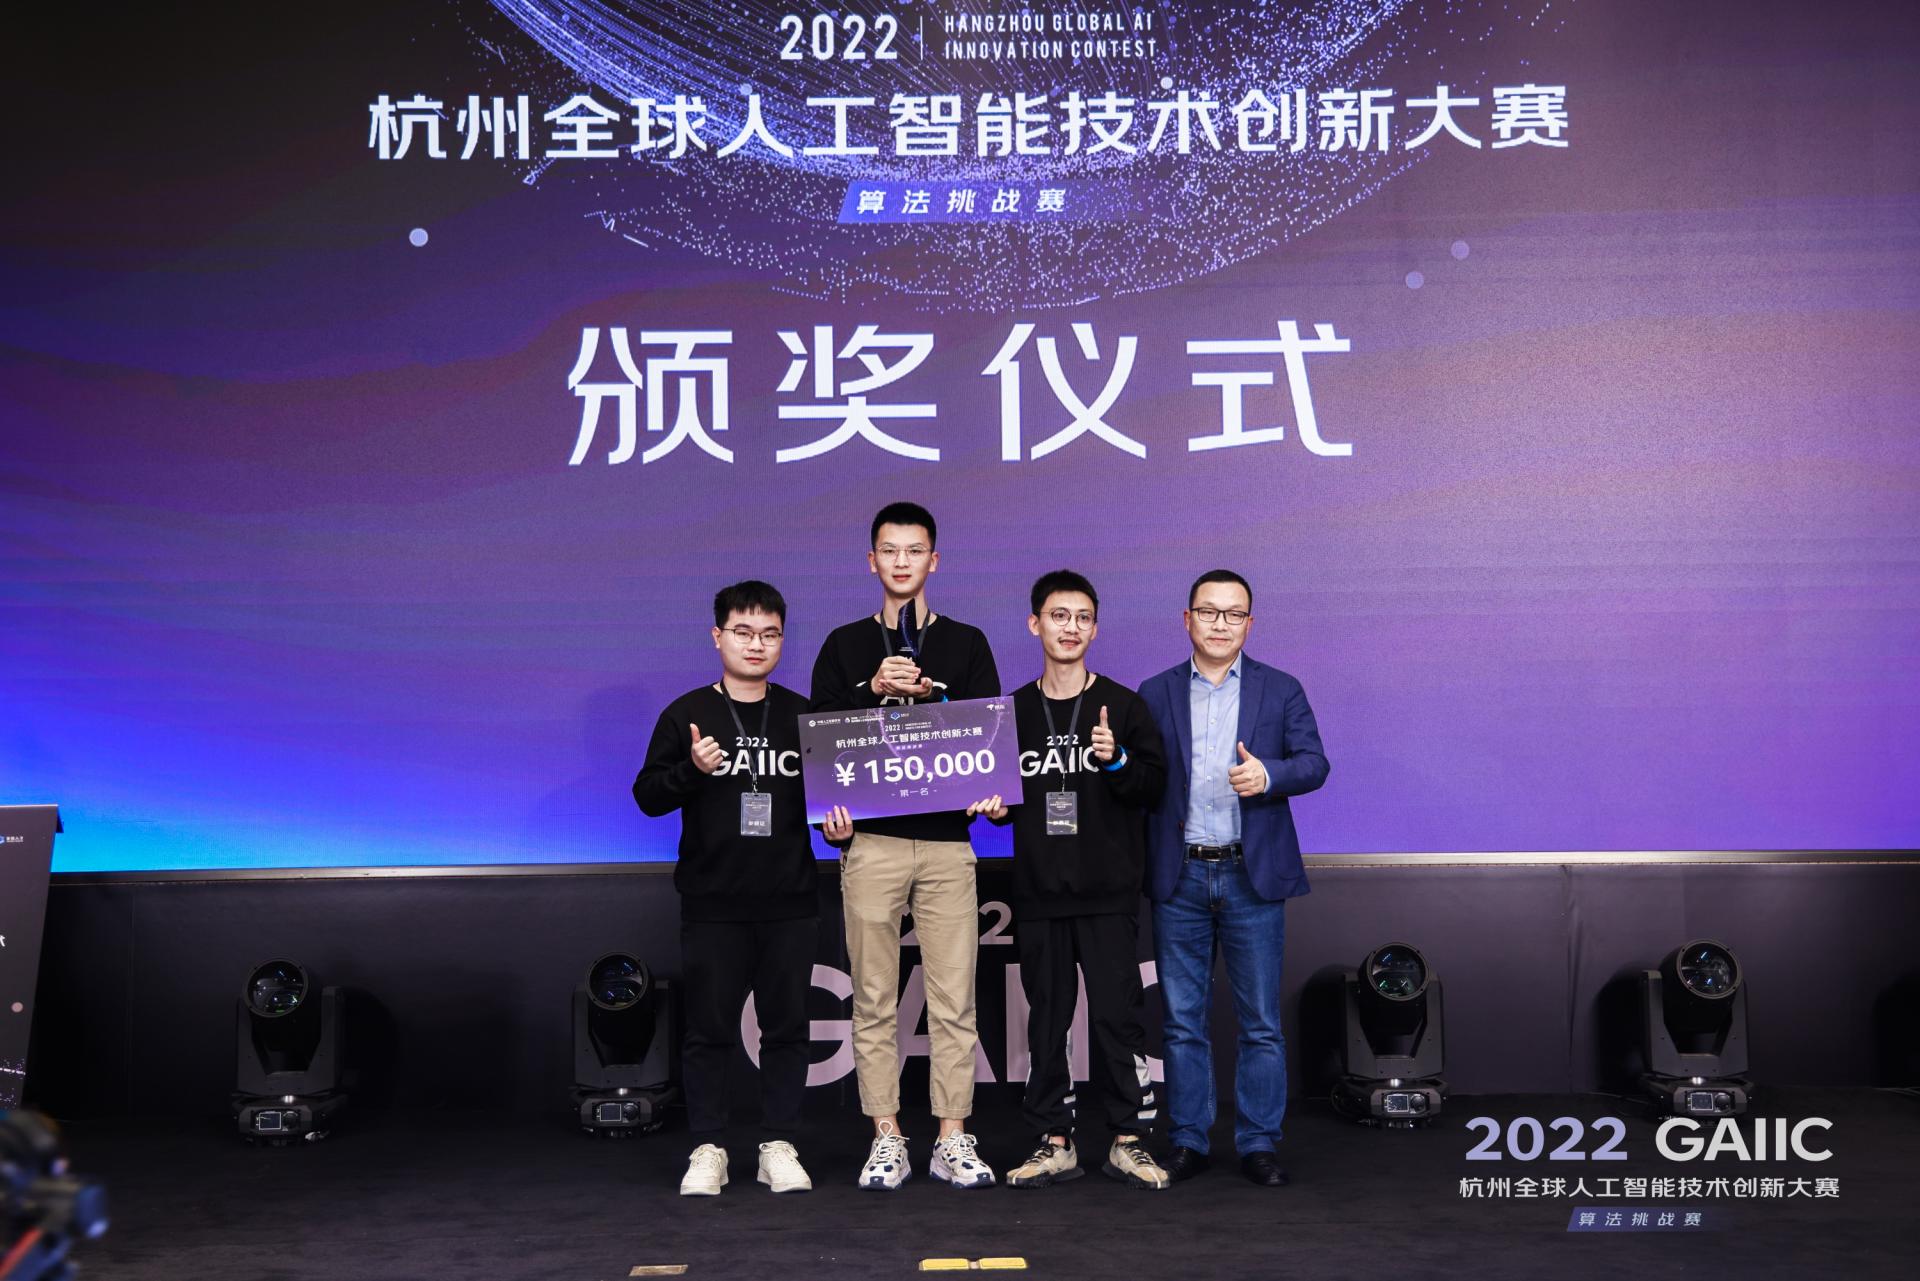 SUSTech students excel in 2022 Global AI Innovation Contest